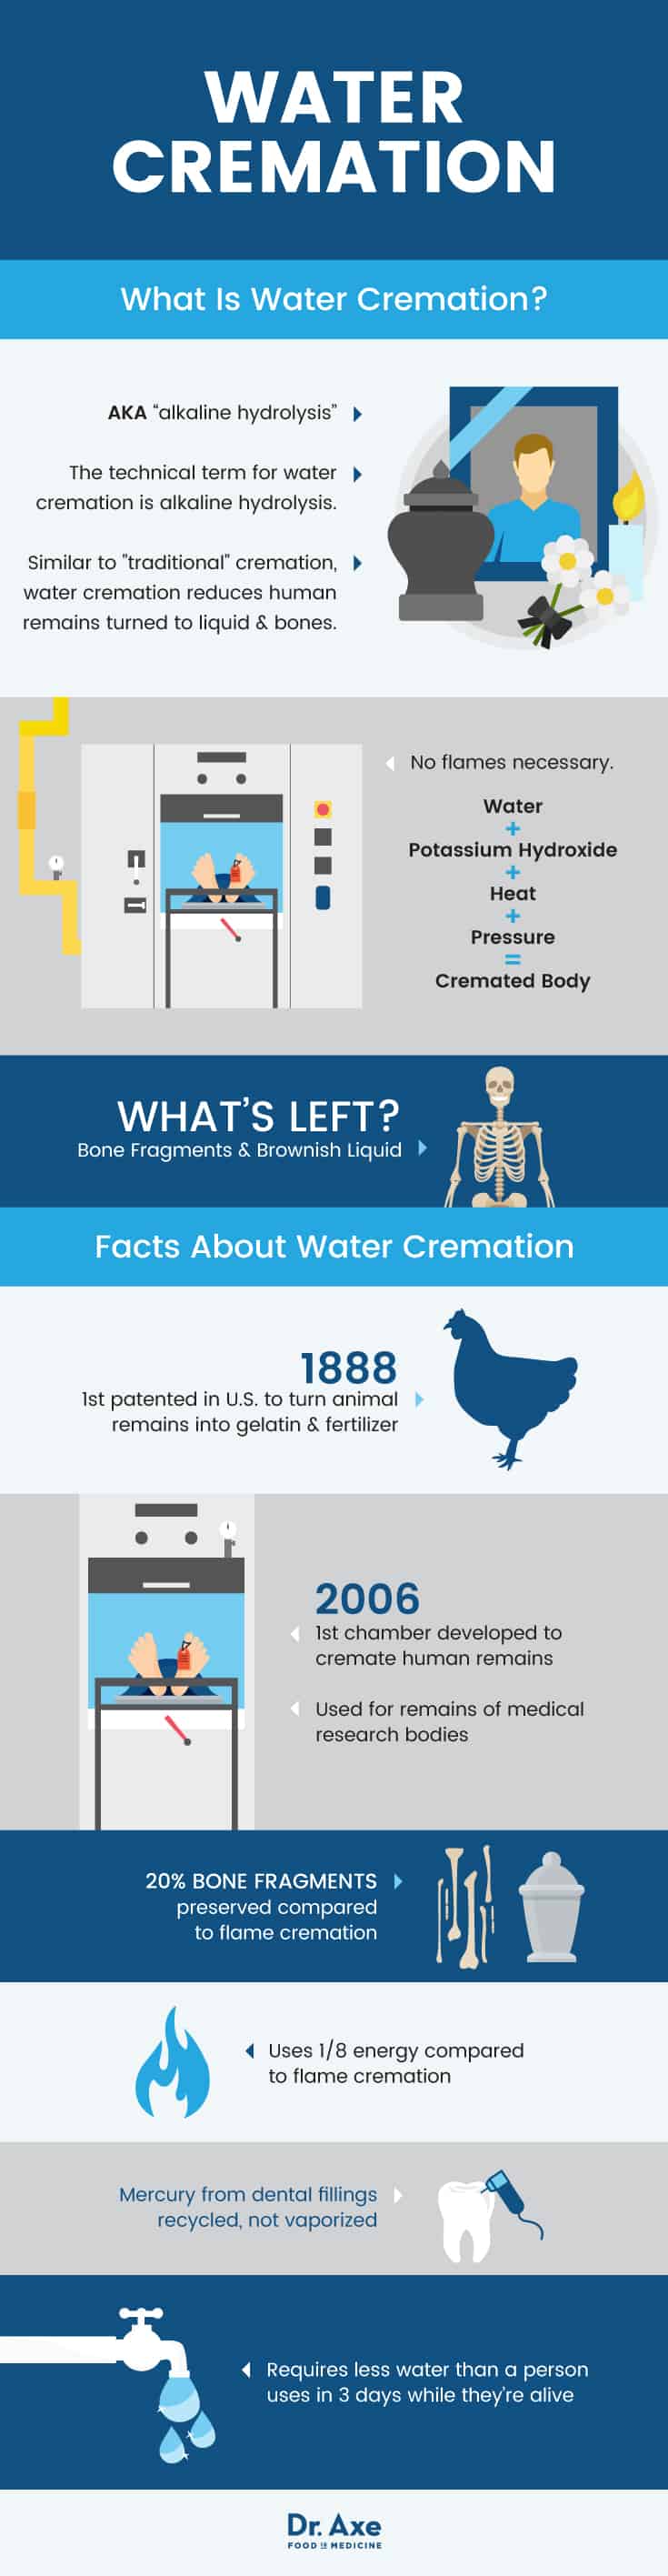 Water cremation - Dr. Axe